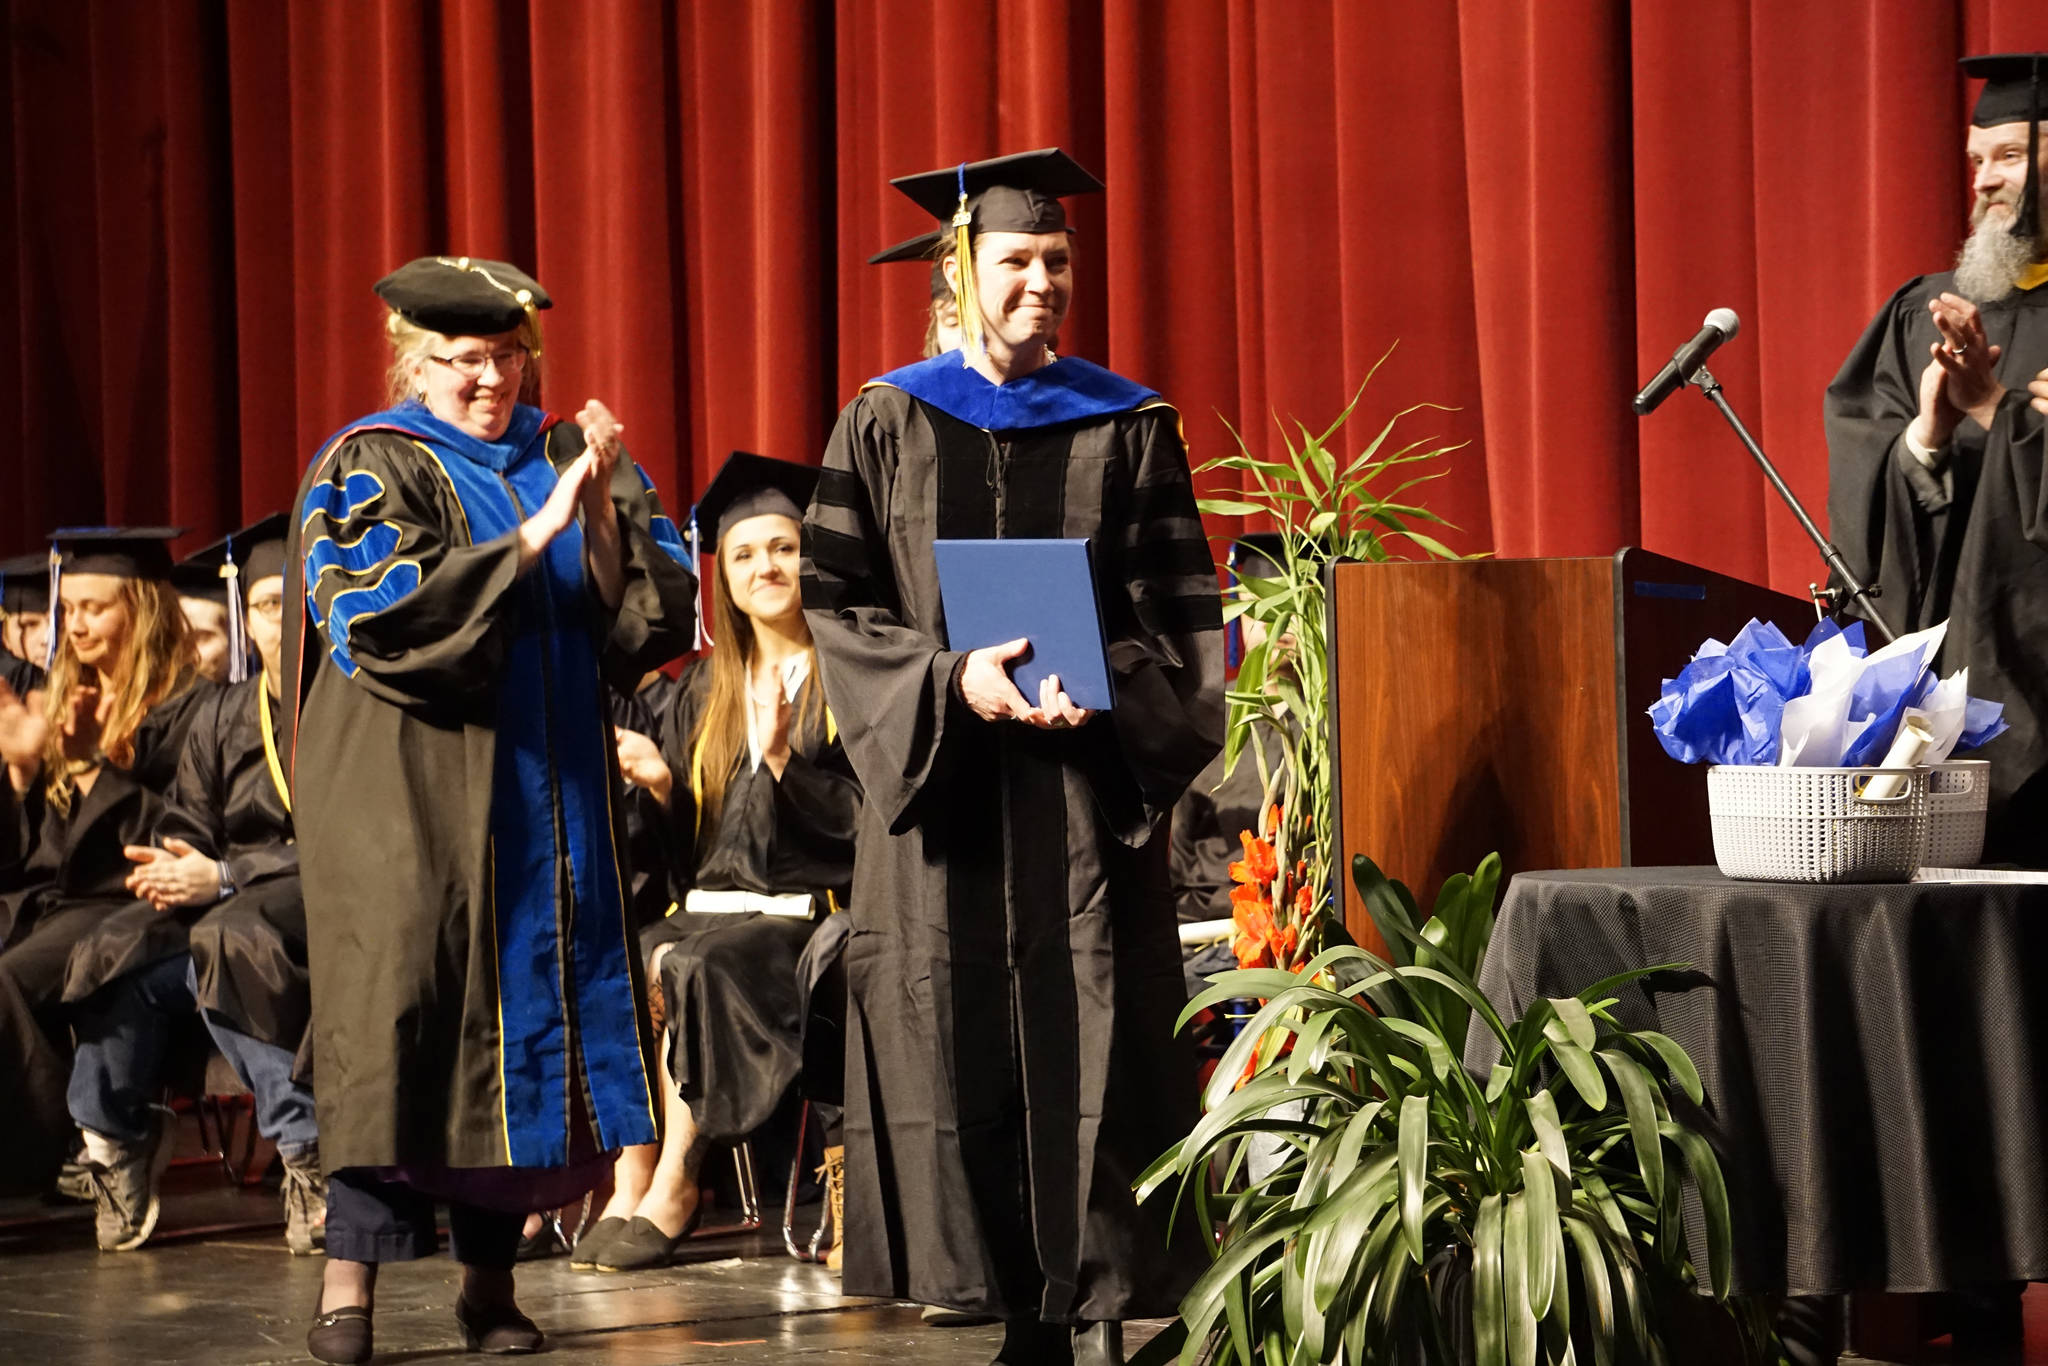 Emilie Springer smiles after receiving her doctor in anthropology degree and hood at the Kachemak Bay Campus commencement last Wednesday, May 8, 2019, at the Mariner Theatre in Homer, Alaska. Applauding at left is KBC interim campus director Paula Martin. A Homer resident from Ninilchik, Springer received her doctorate from the University of Alaska Fairbanks but chose to receive her PhD. in her home town — the first doctorate to do so at KBC commencement. (Photo by Michael Armstrong/Homer News.)